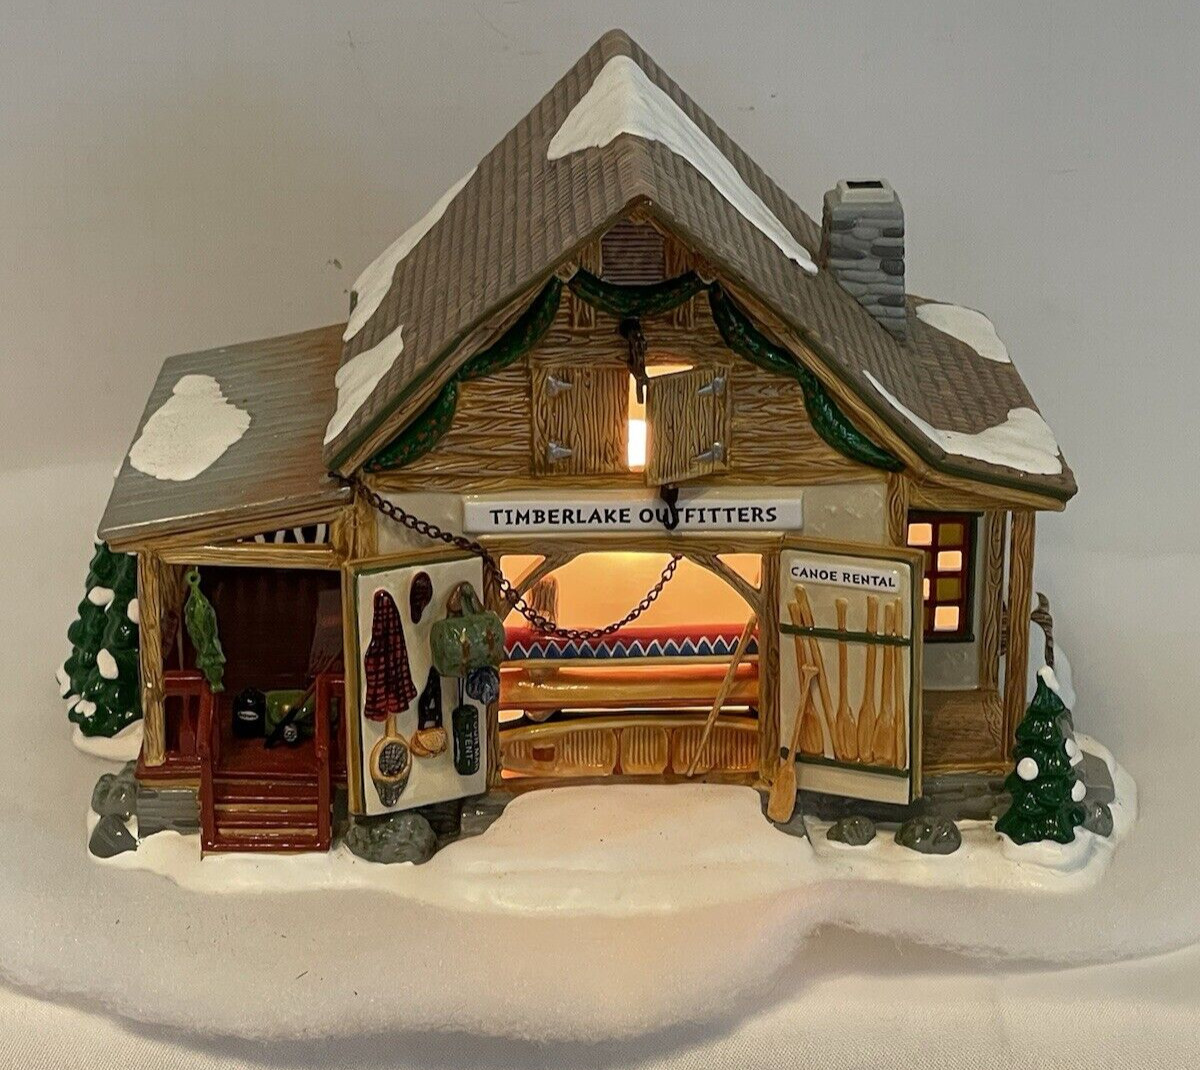 Department 56 Snow Village Timberlake Outfitters #55054